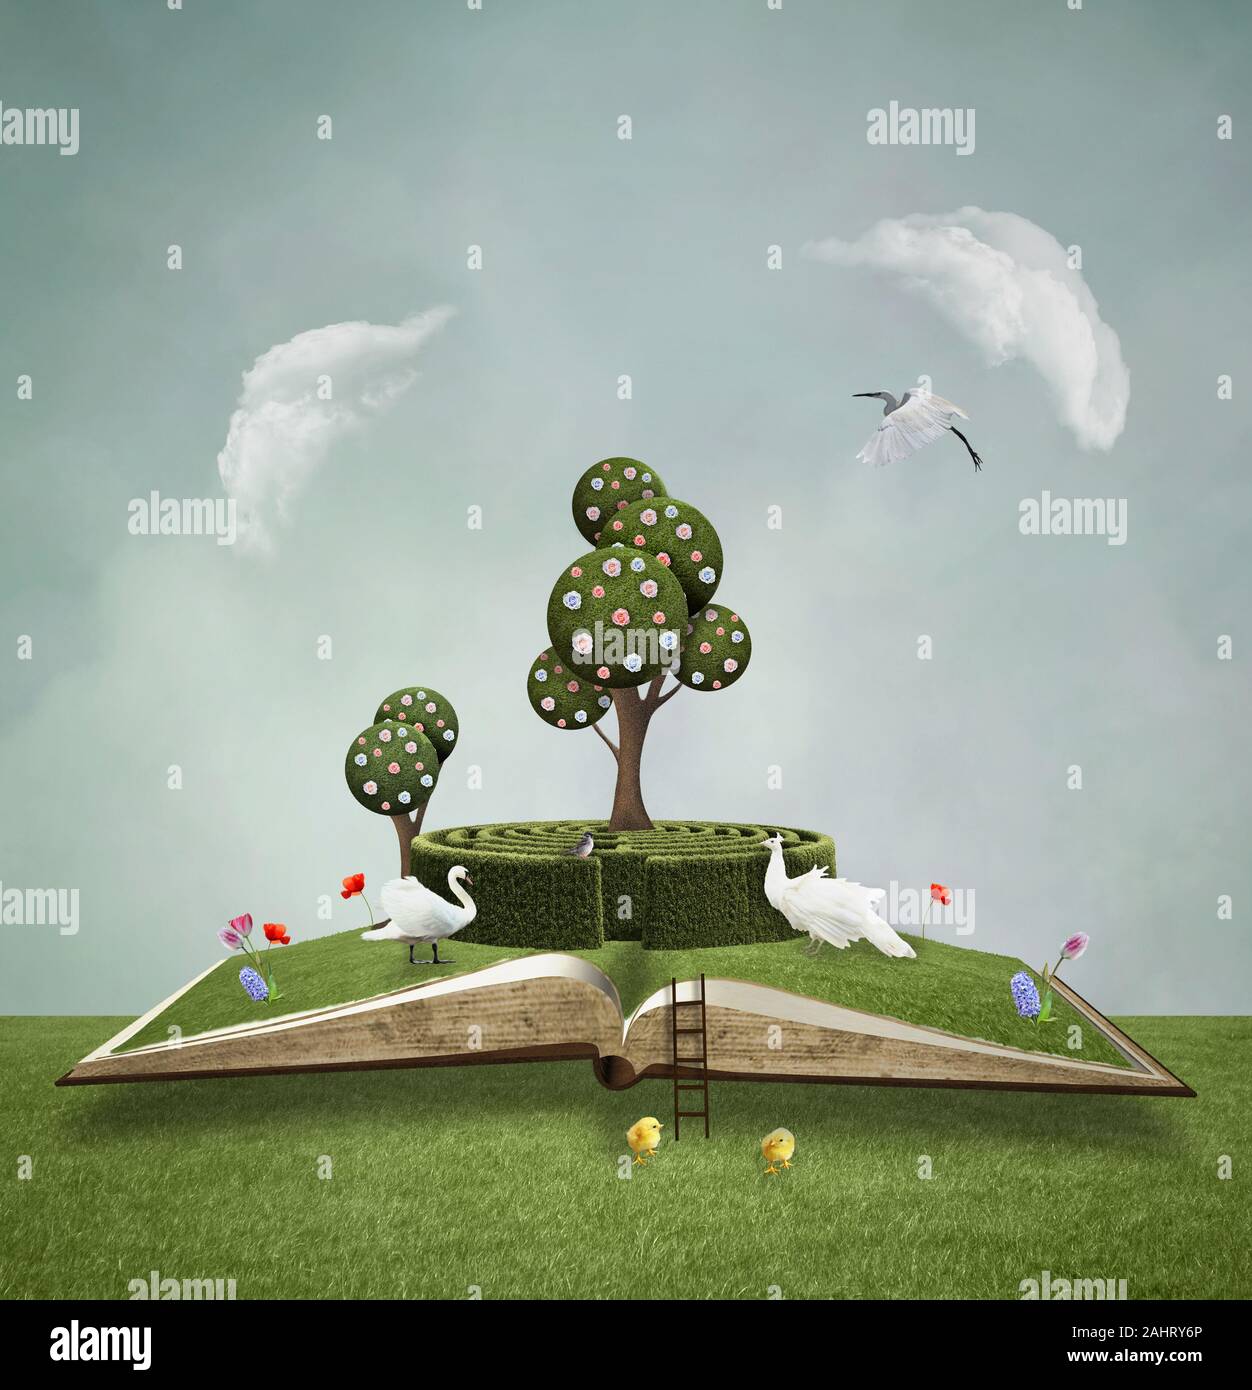 Green book in a surreal scenery Stock Photo